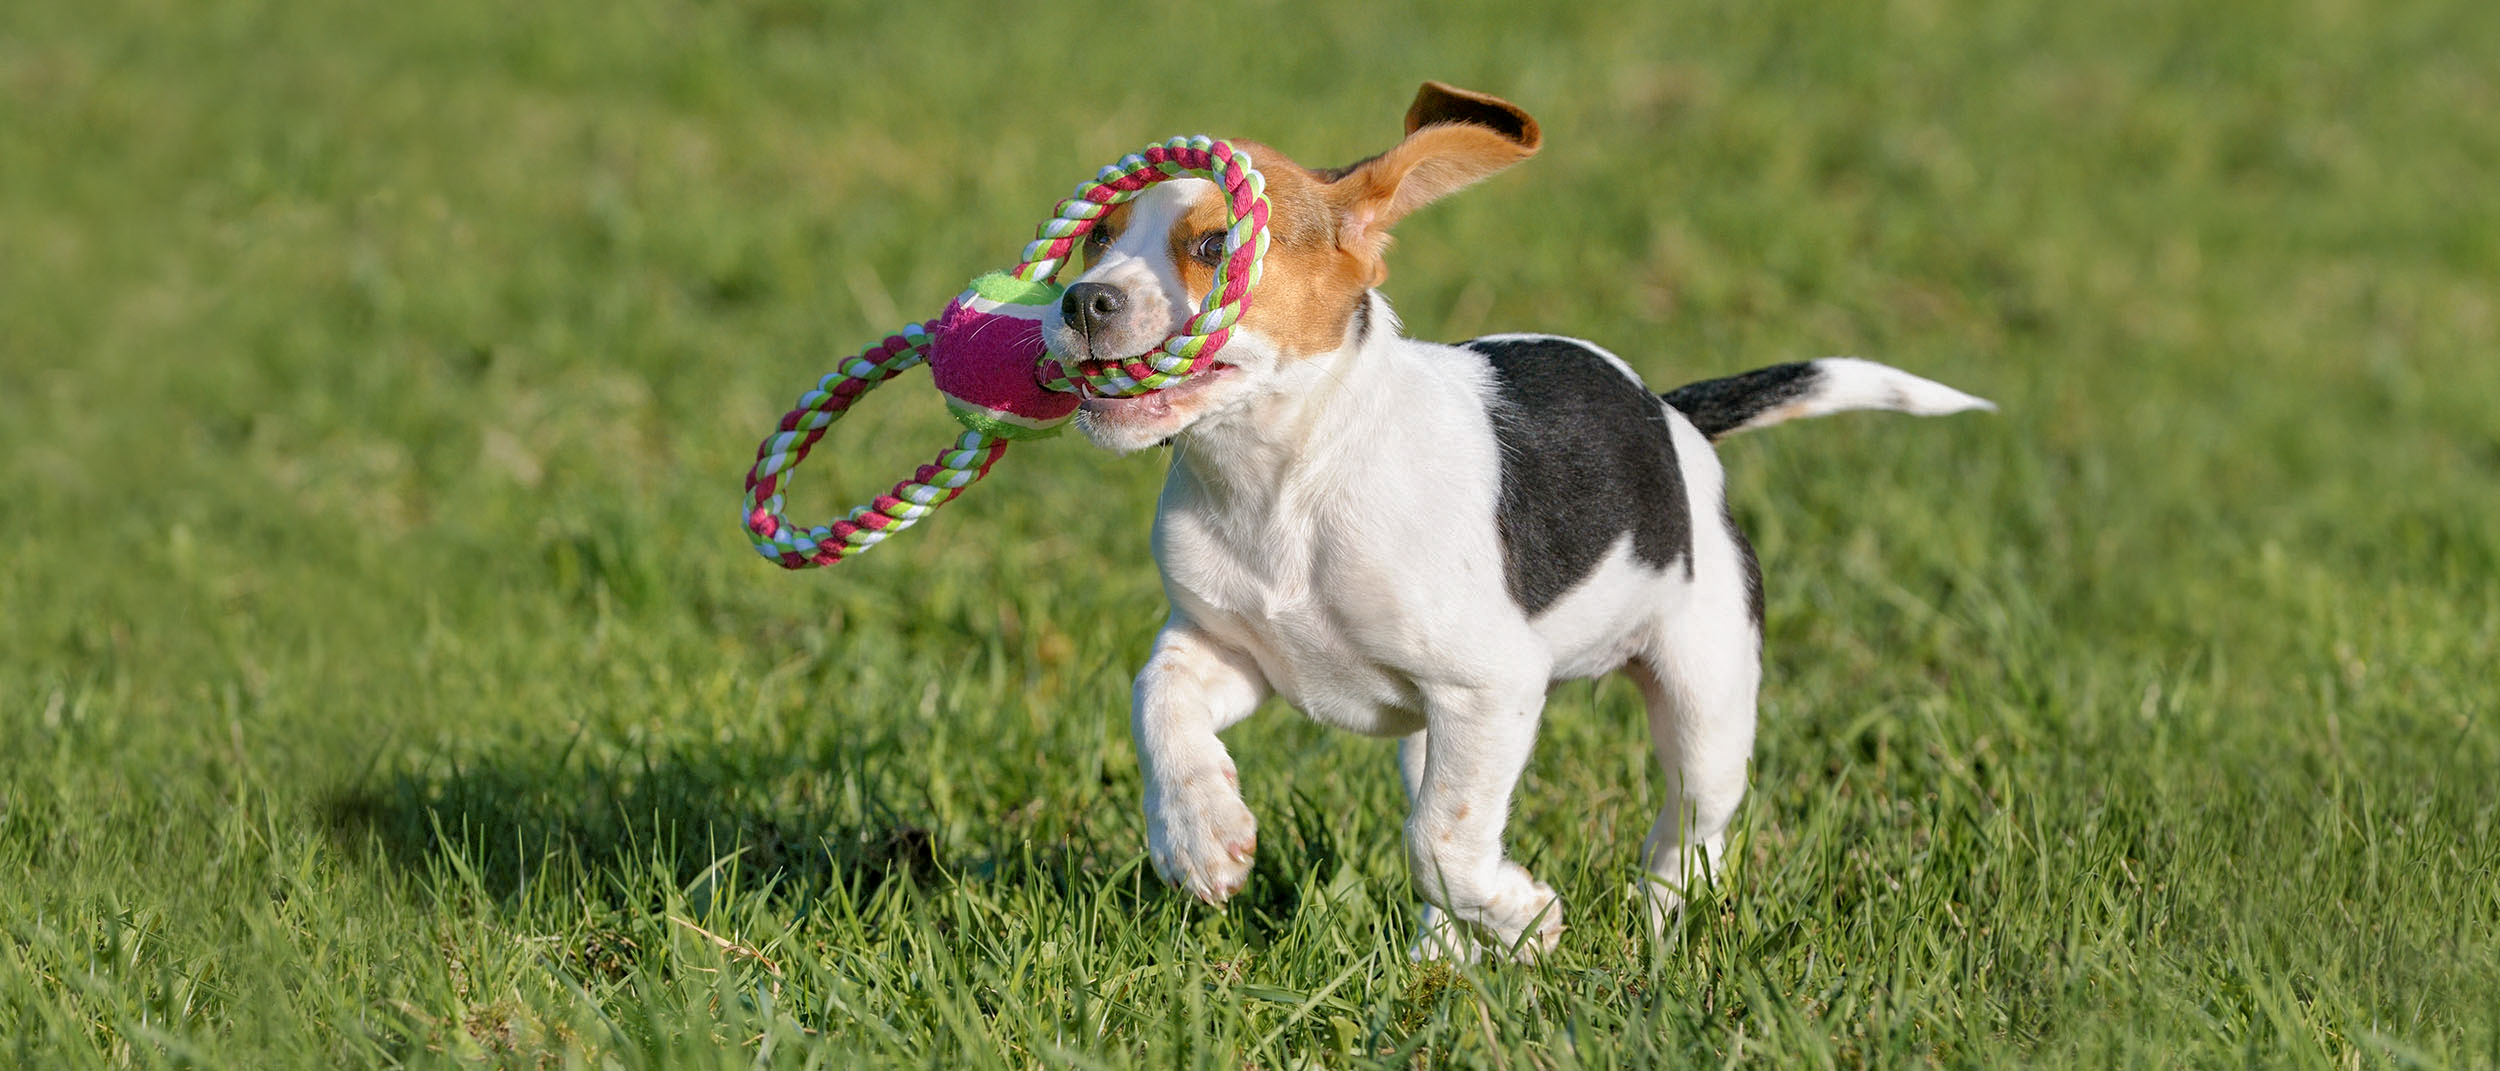 Puppy Beagle running outdoors in grass with a dog toy.